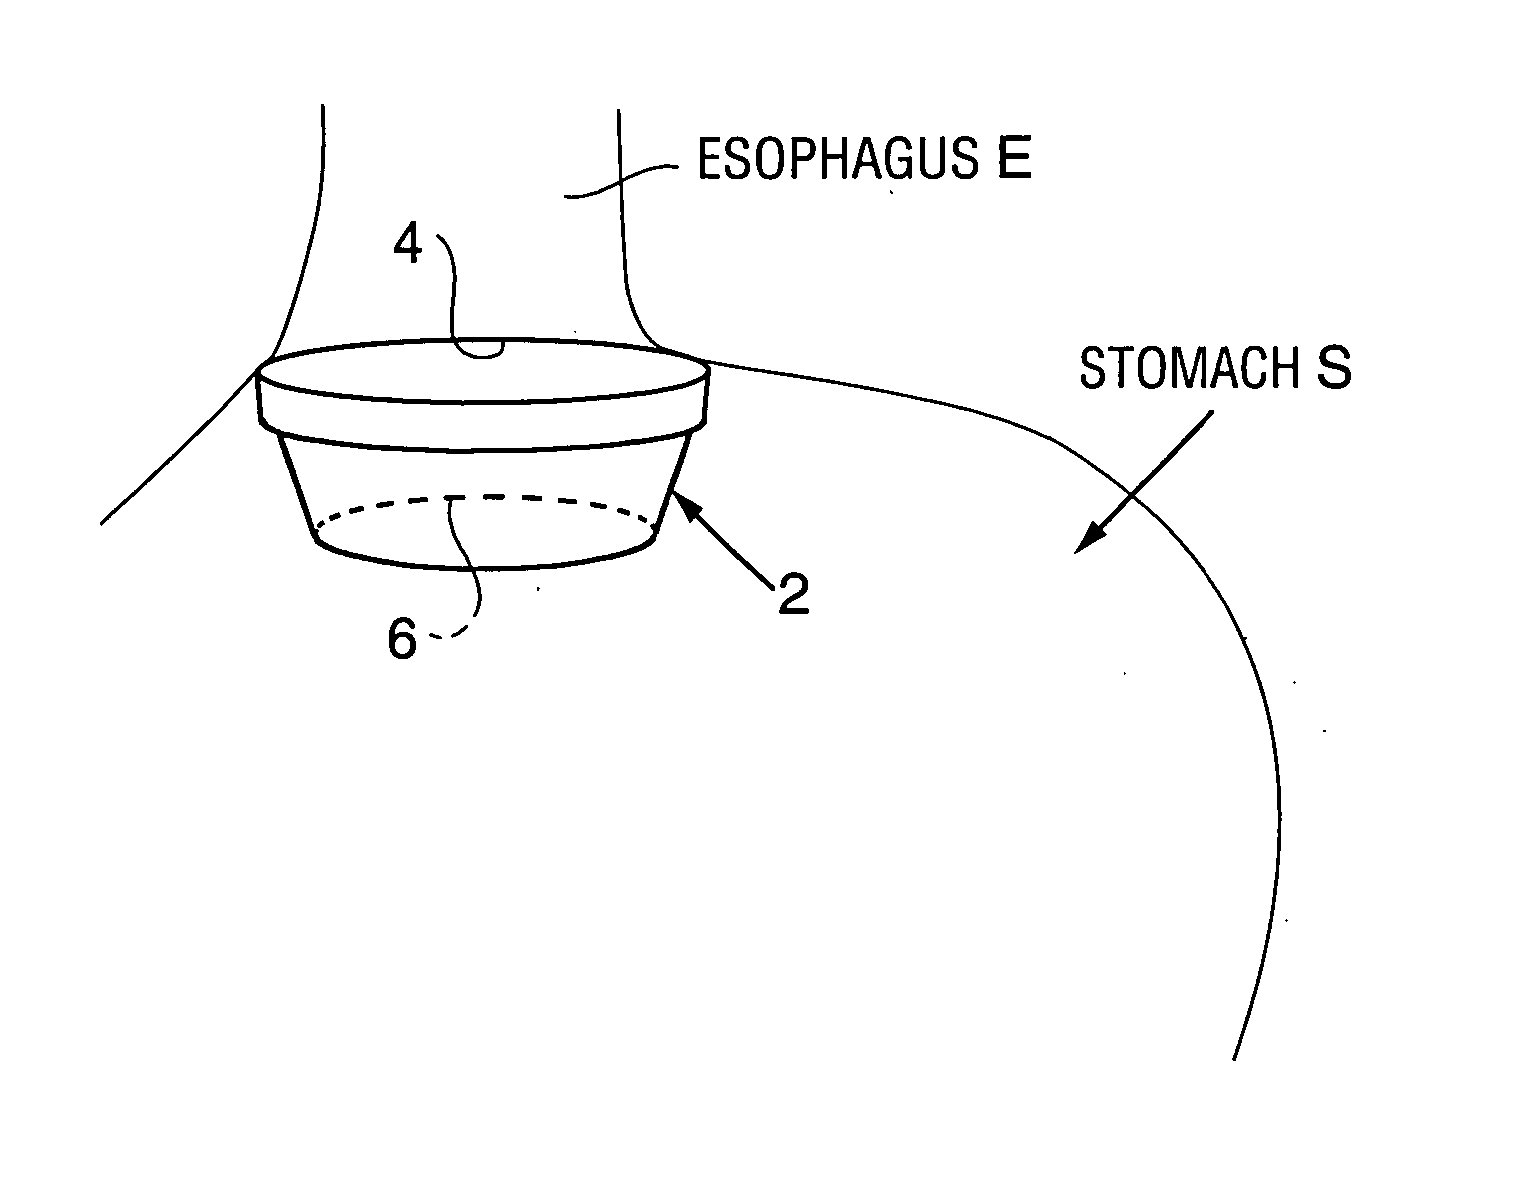 Method and apparatus for modifying the exit orifice of a satiation pouch